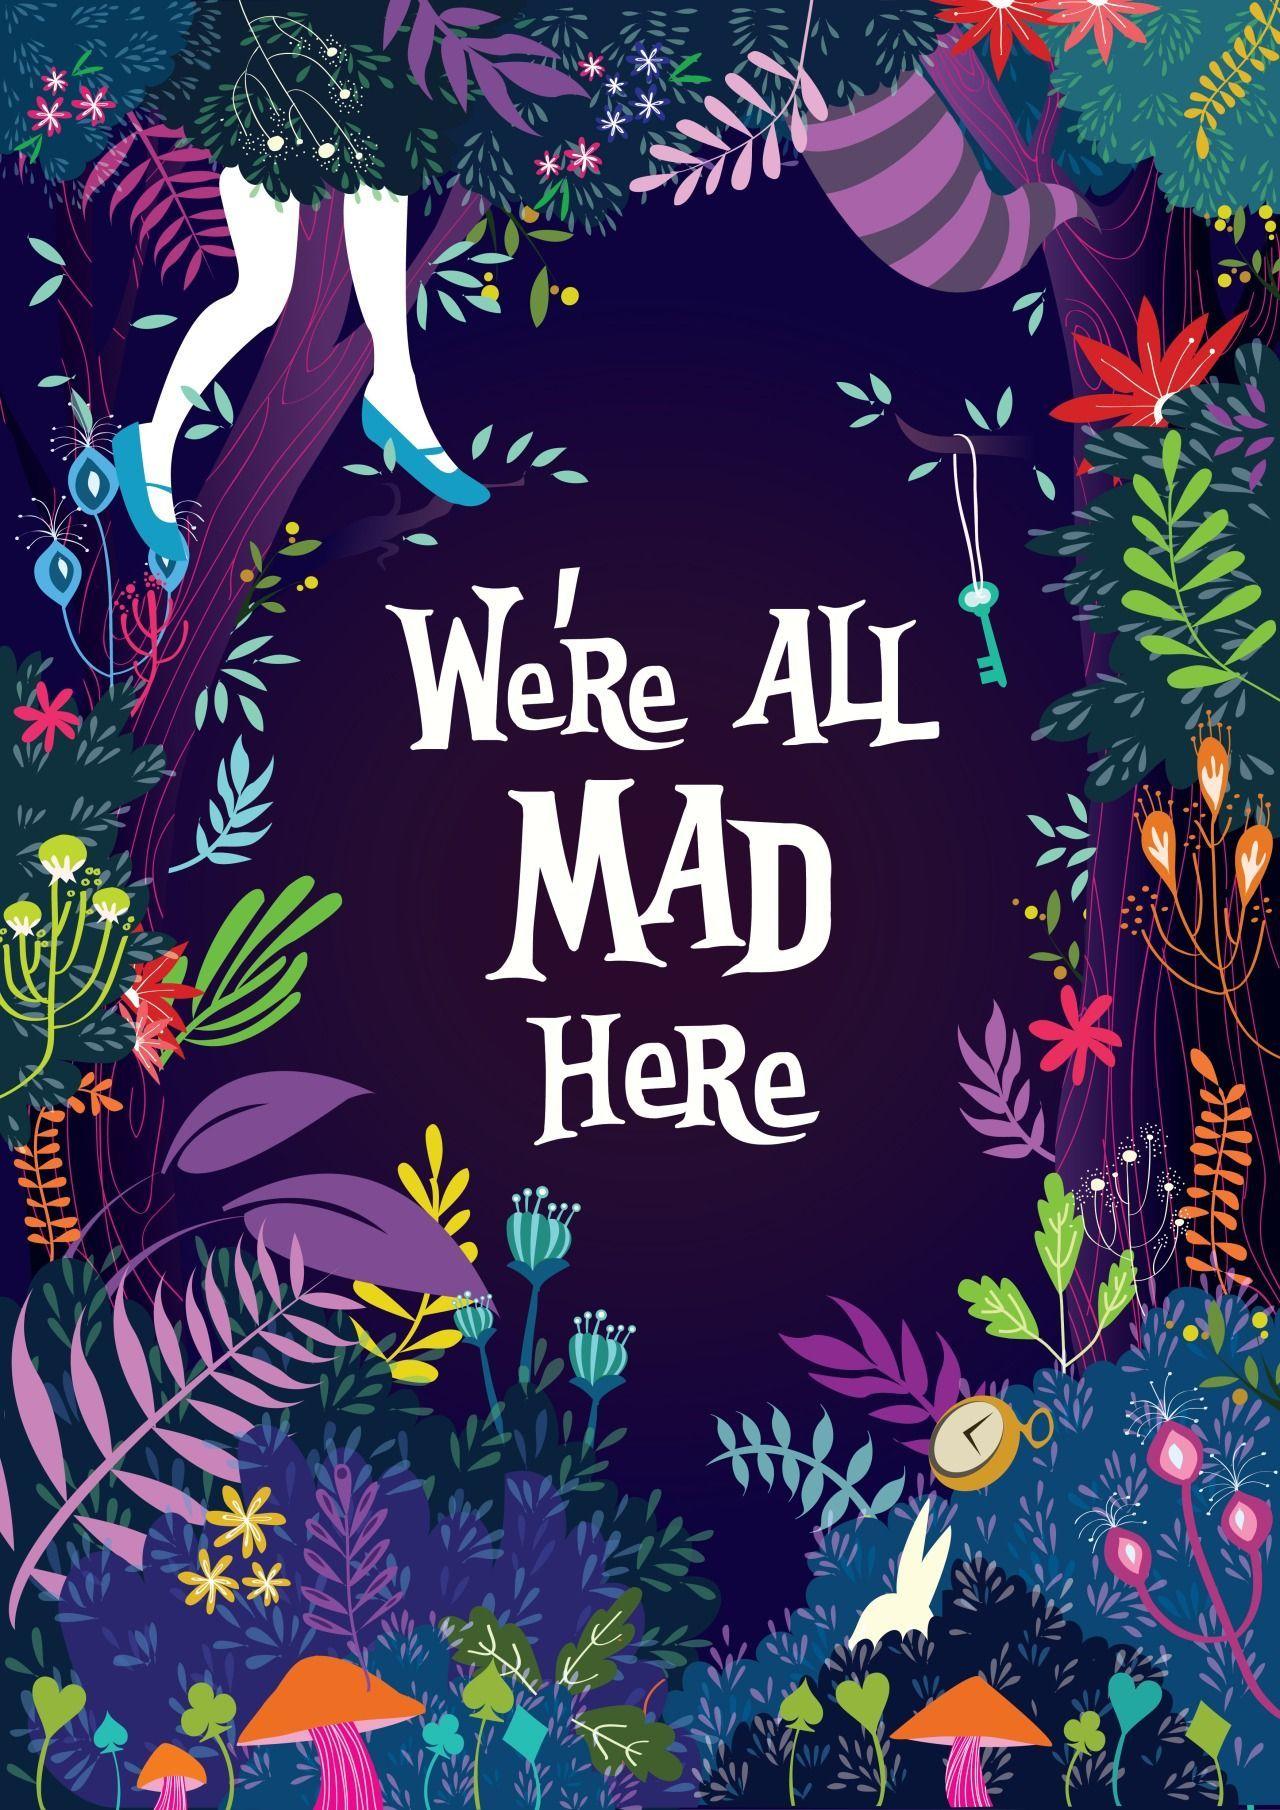 ALICE in WONDERLAND We're all mad here. by Princess So tumblr